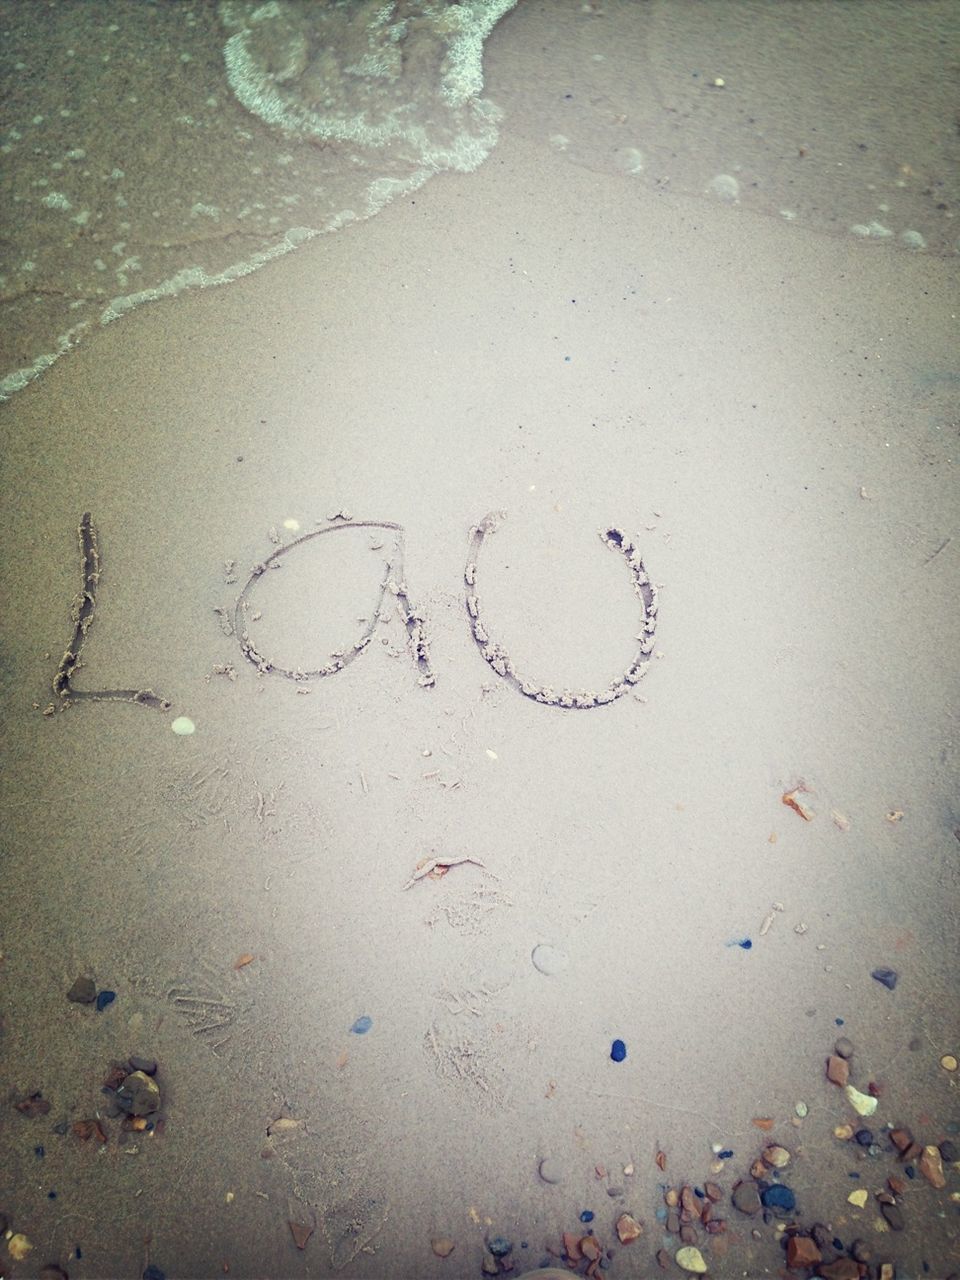 text, water, sand, beach, western script, high angle view, communication, shore, footprint, wet, heart shape, love, close-up, day, outdoors, creativity, no people, capital letter, ideas, nature